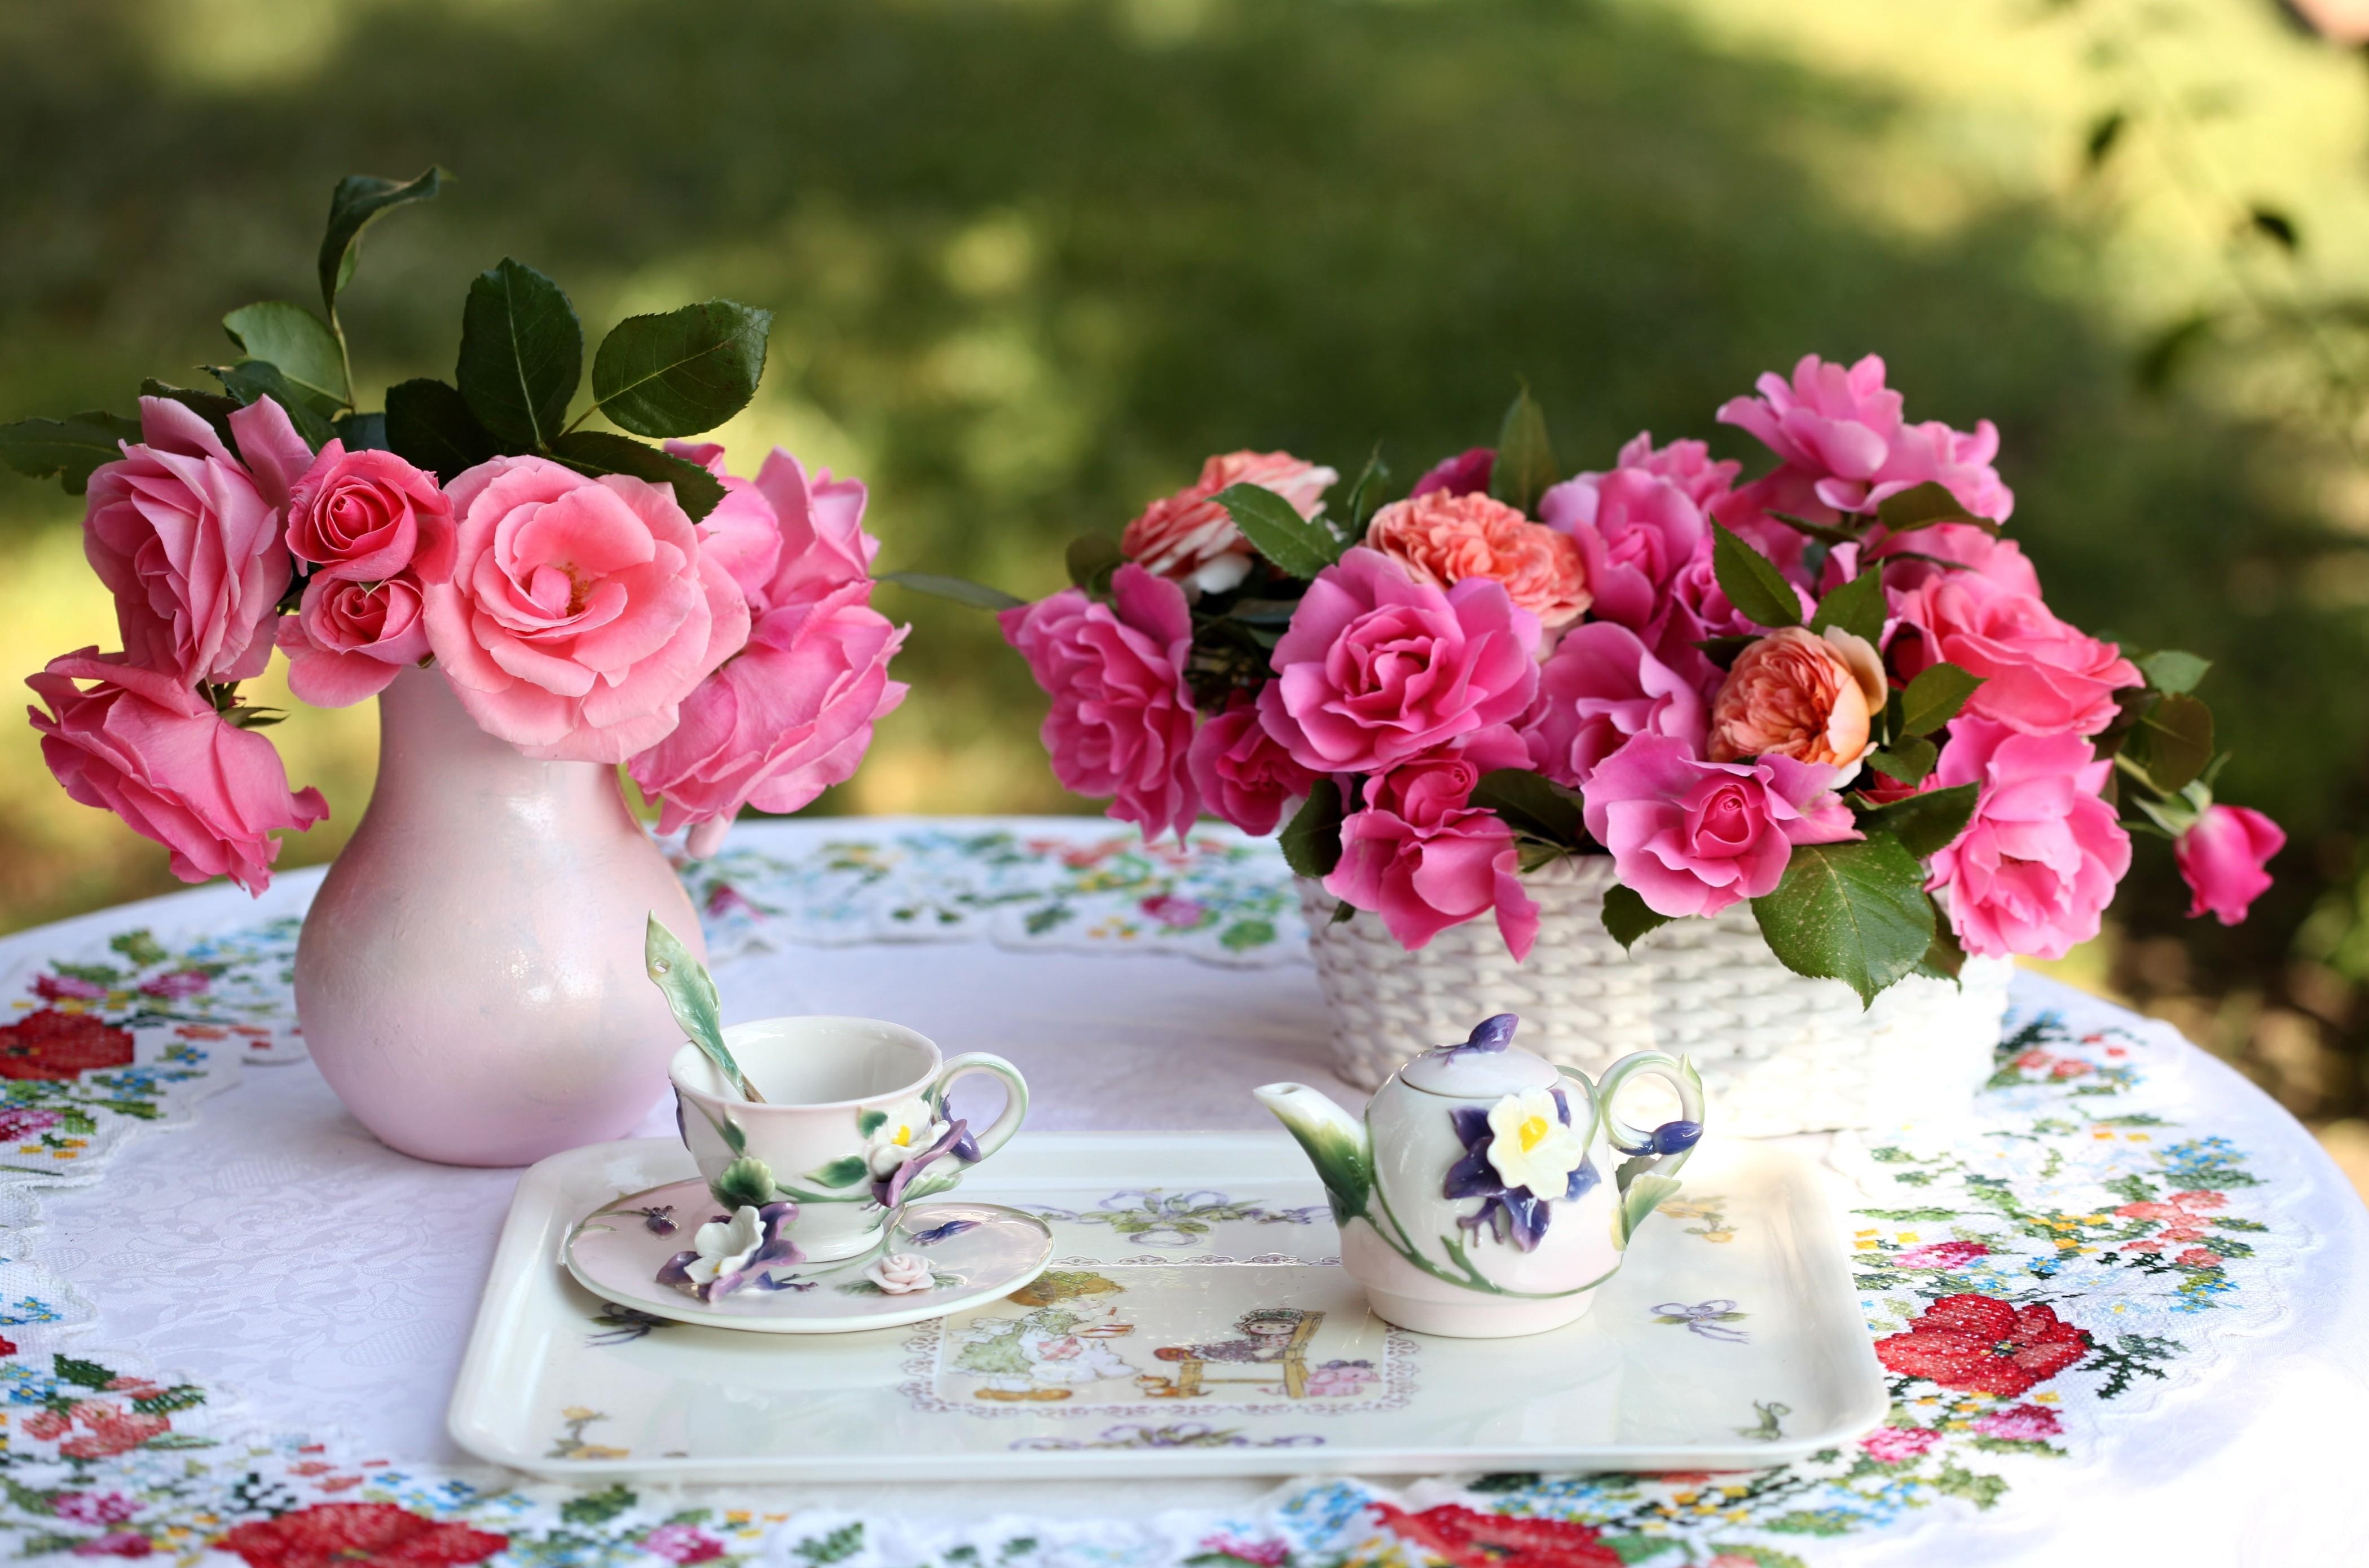 Free Images tablecloth, flowers, vase, roses Table